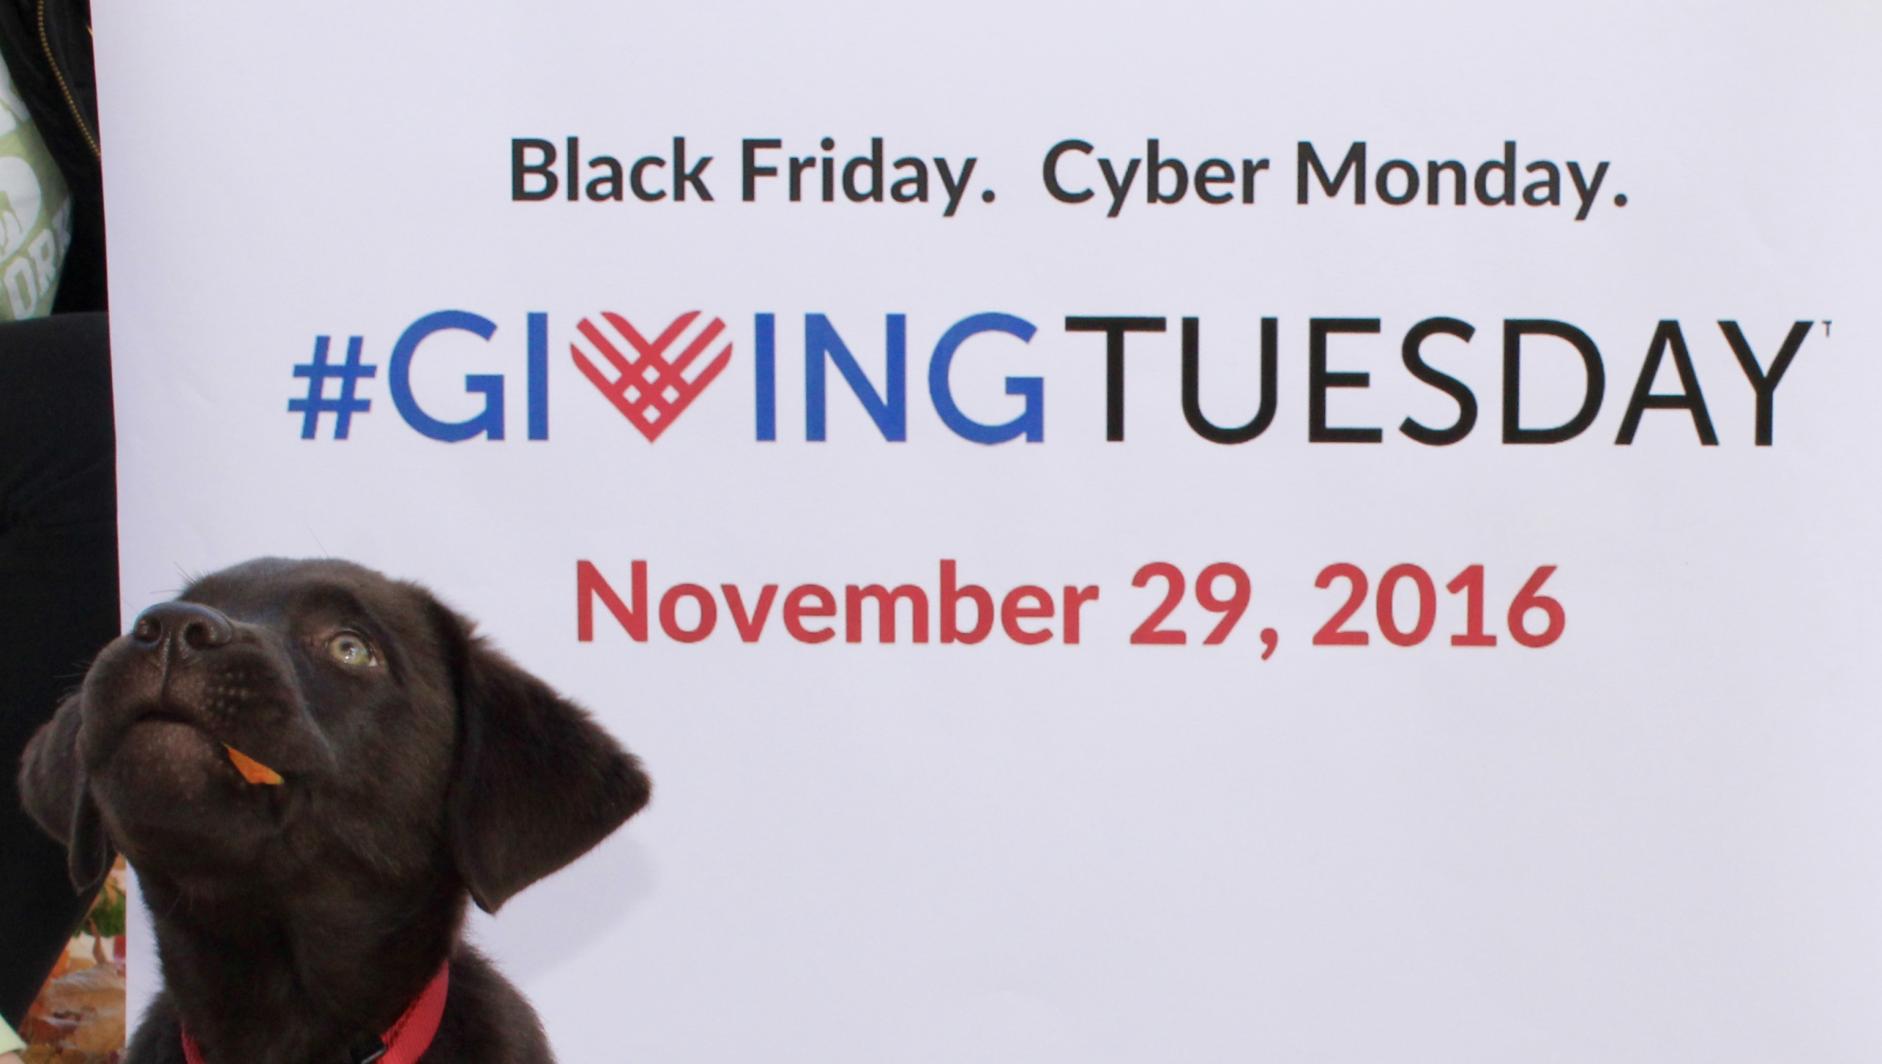 The first dog, Jack, poses with a #GivingTuesday sign at Springfield College